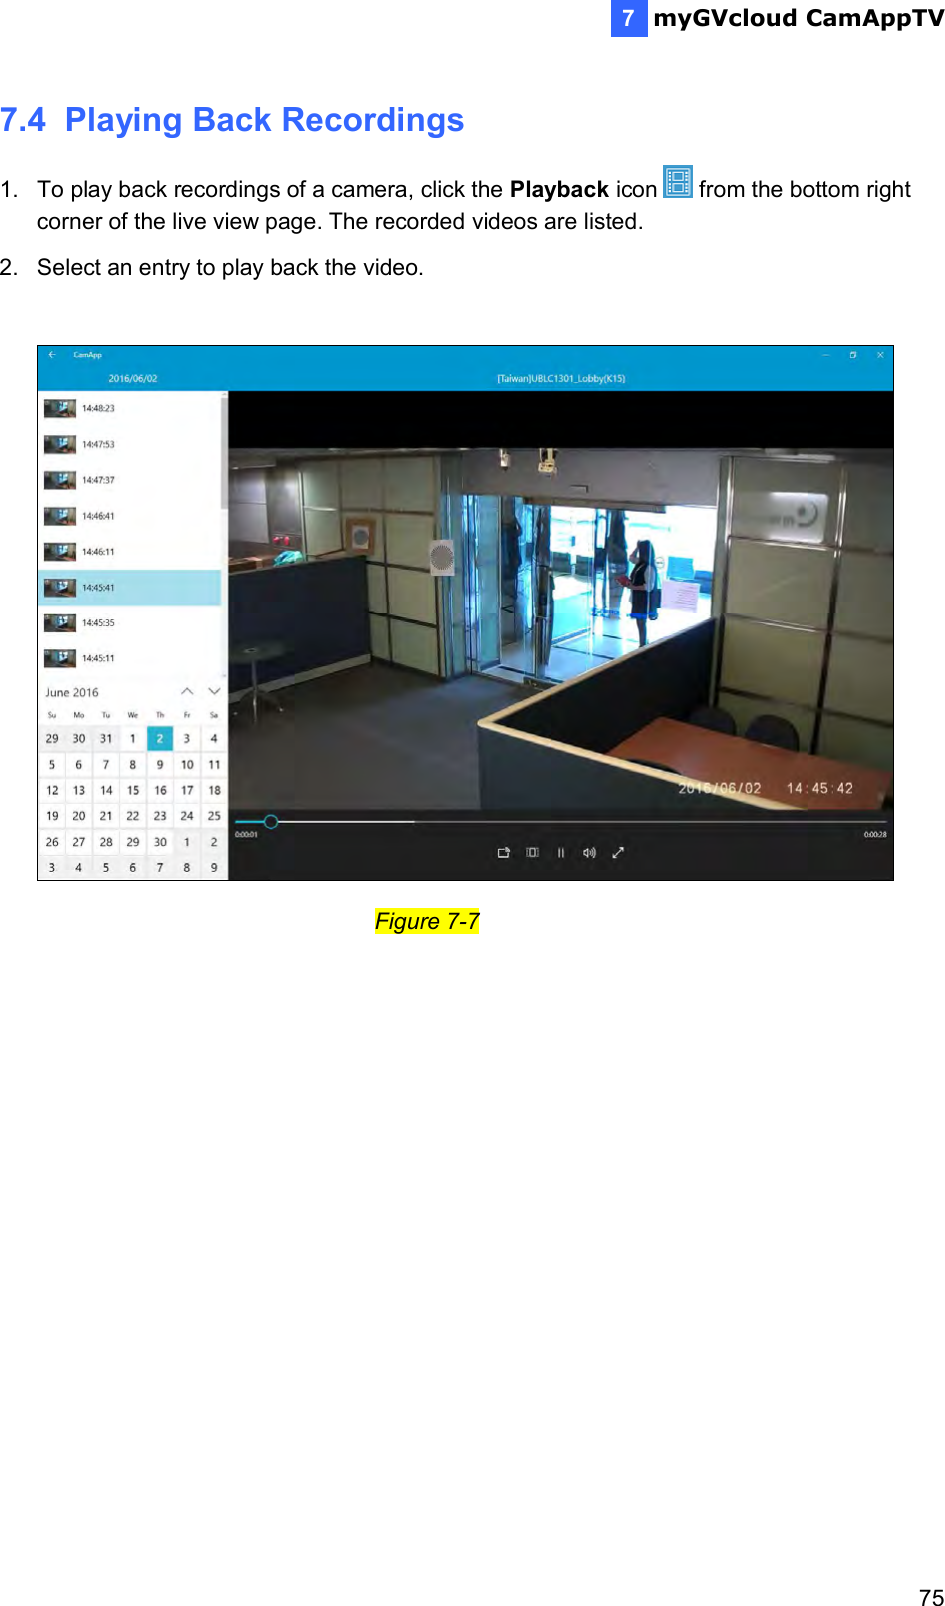  myGVcloud CamAppTV    757 7.4  Playing Back Recordings 1.  To play back recordings of a camera, click the Playback icon   from the bottom right corner of the live view page. The recorded videos are listed. 2.  Select an entry to play back the video.                                    Figure 7-7 